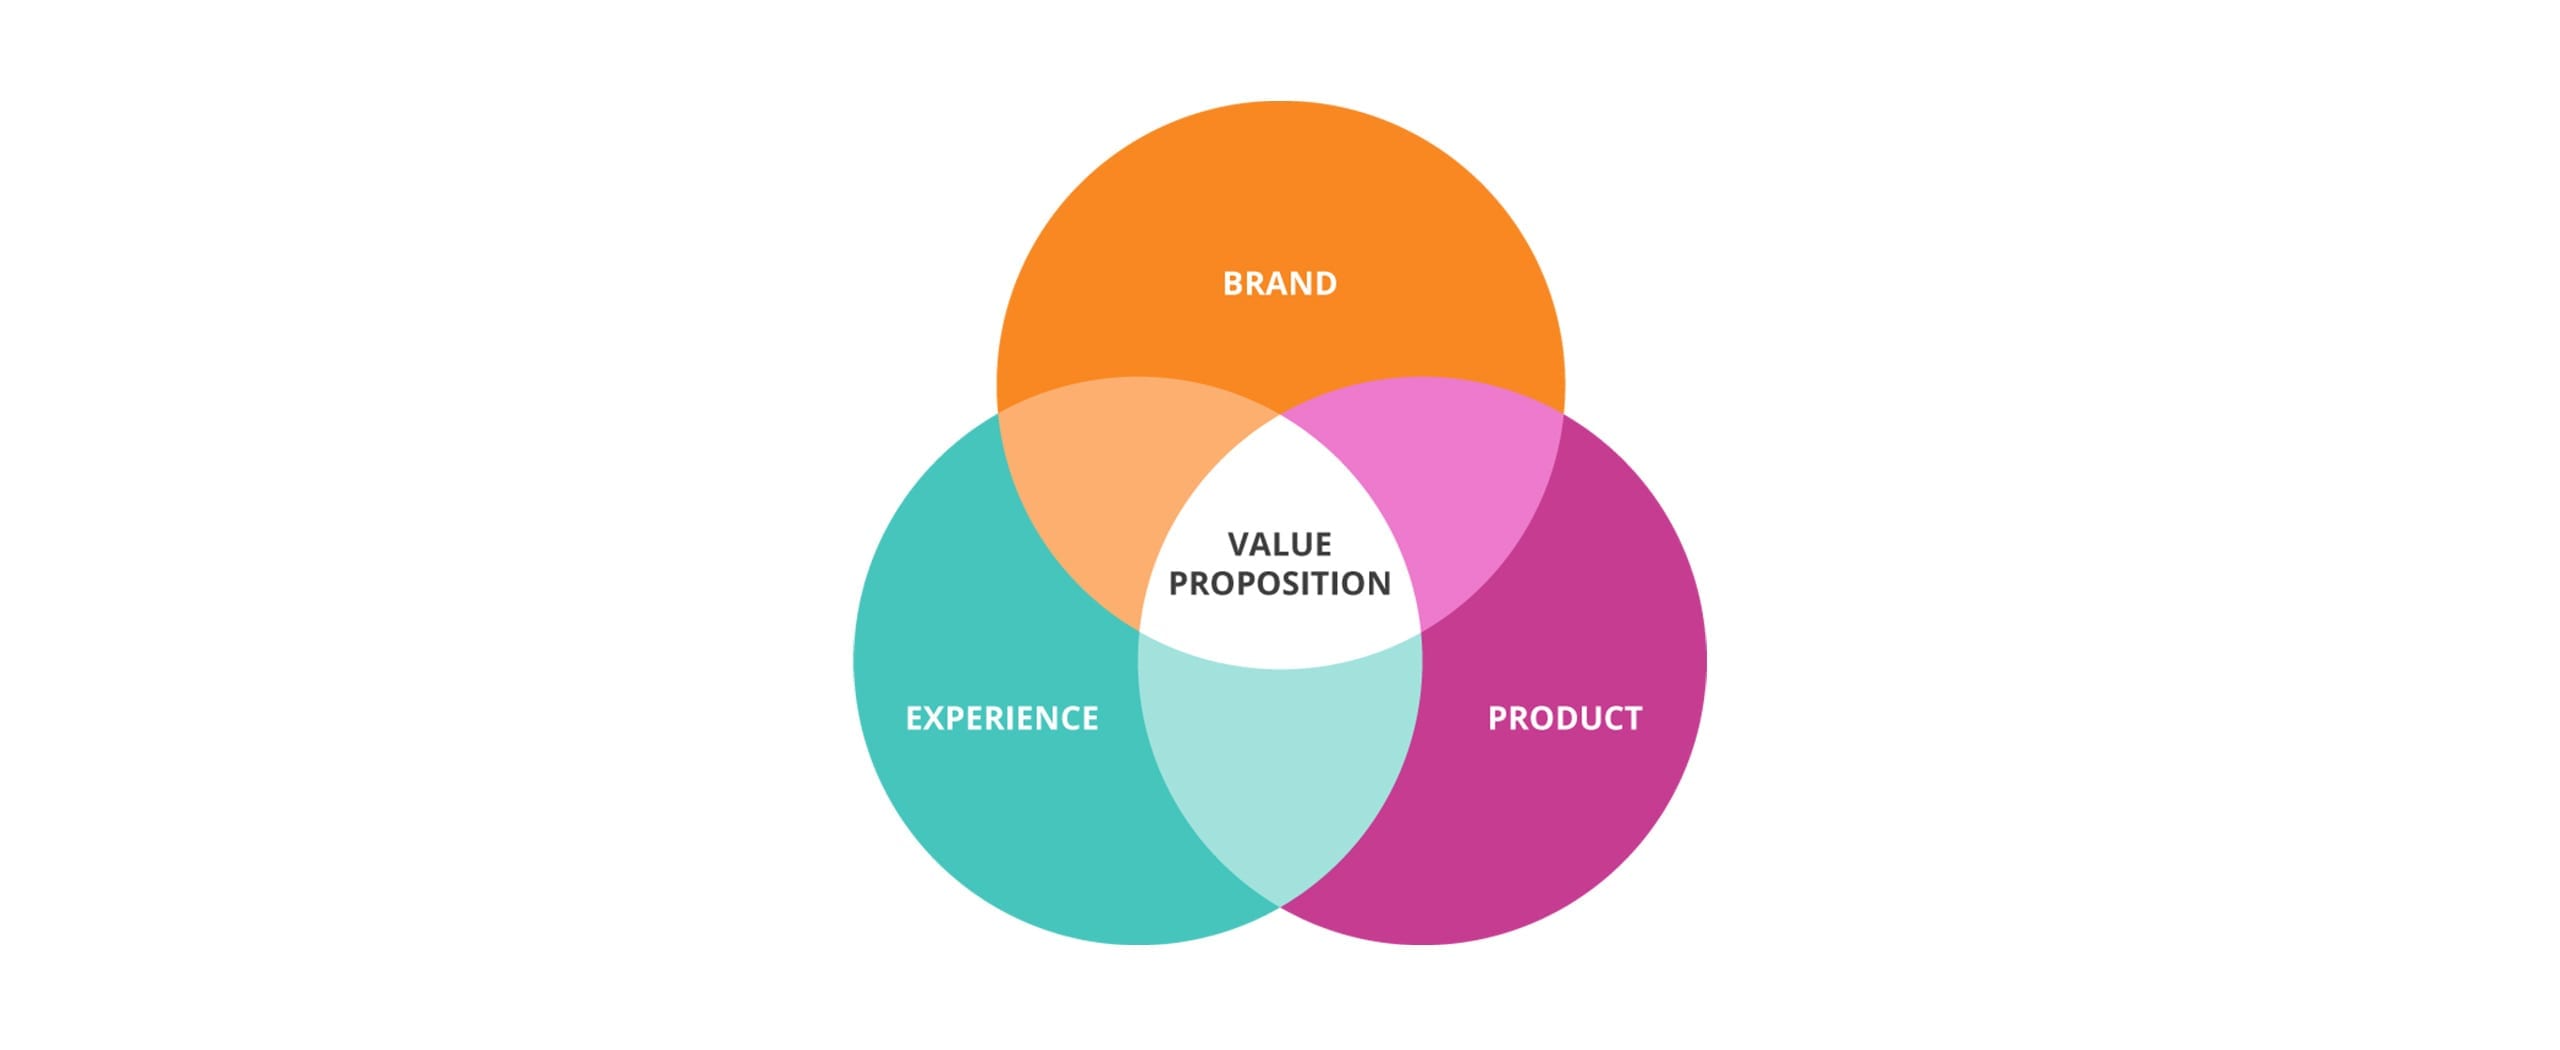 Brand Value Proposition